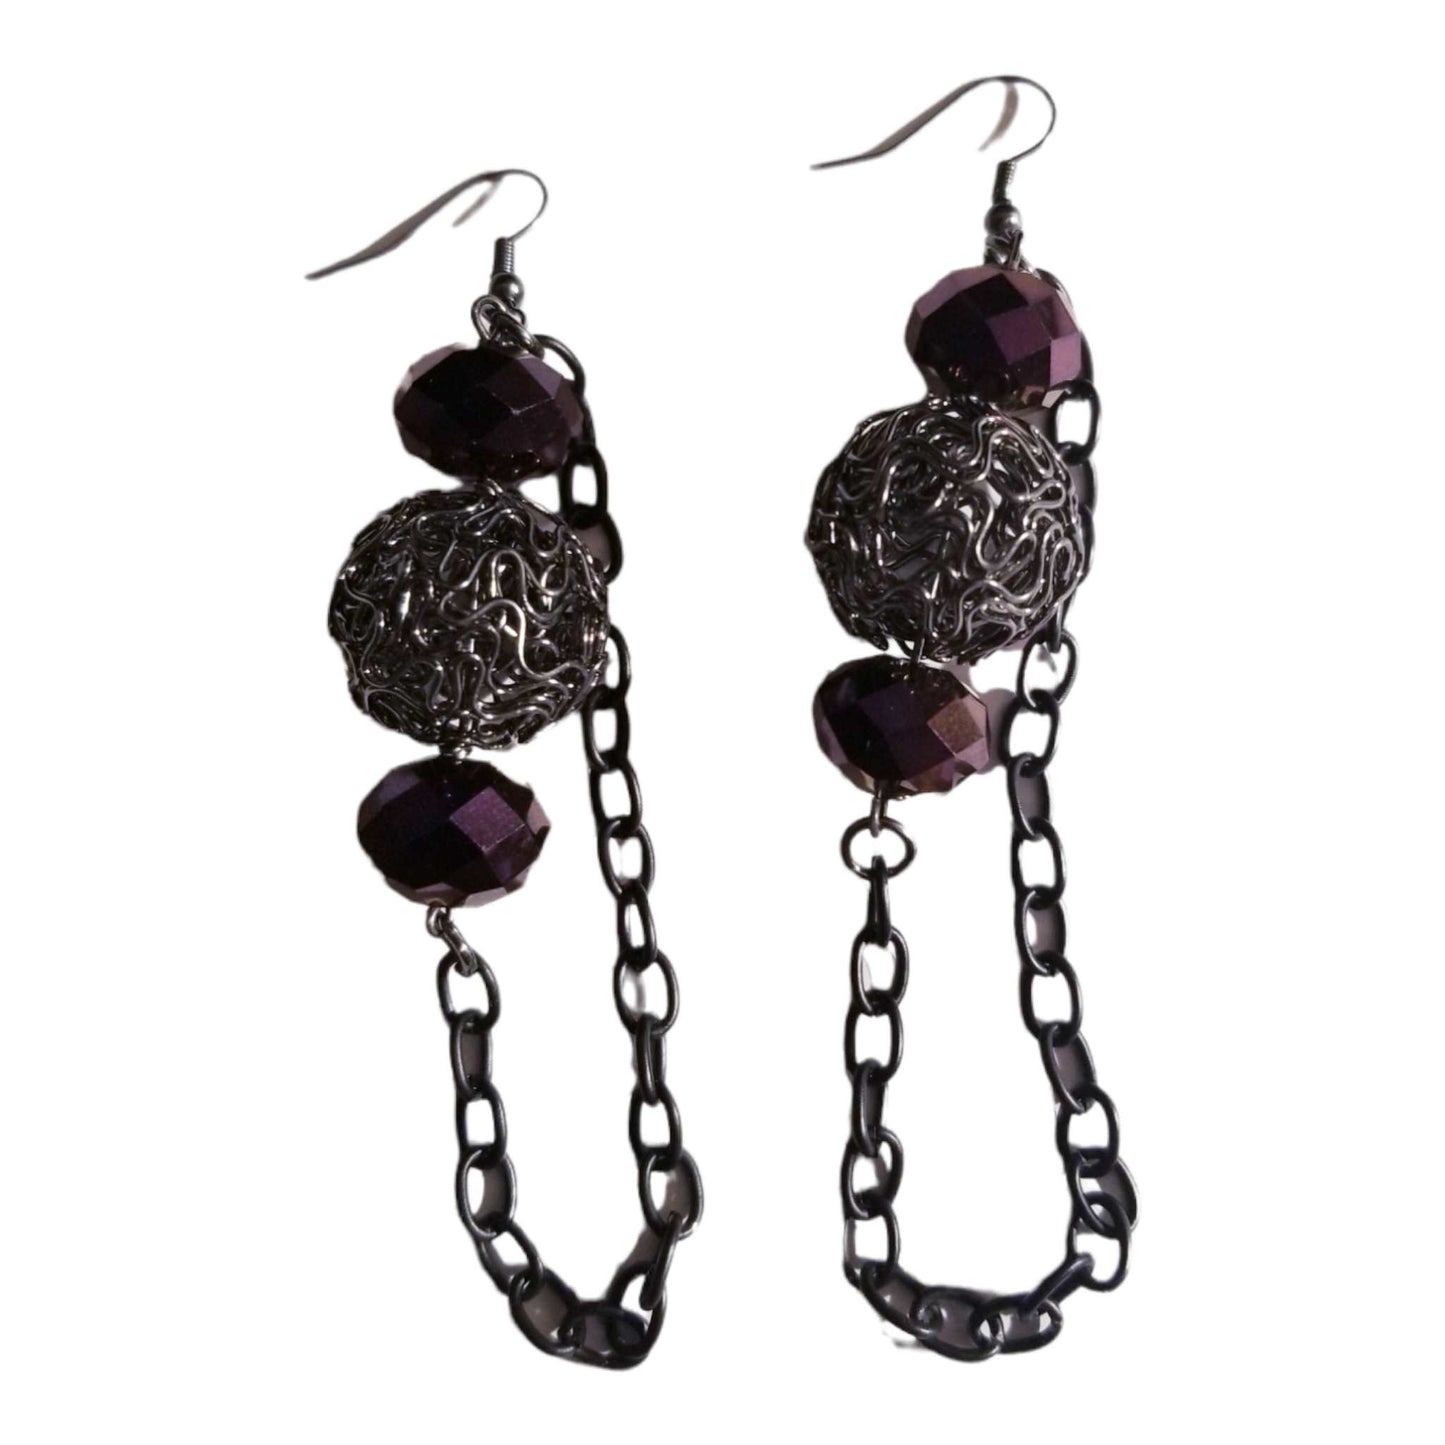 Women's Fashion Earrings Purple and Graphite Dangle with Chain Accent